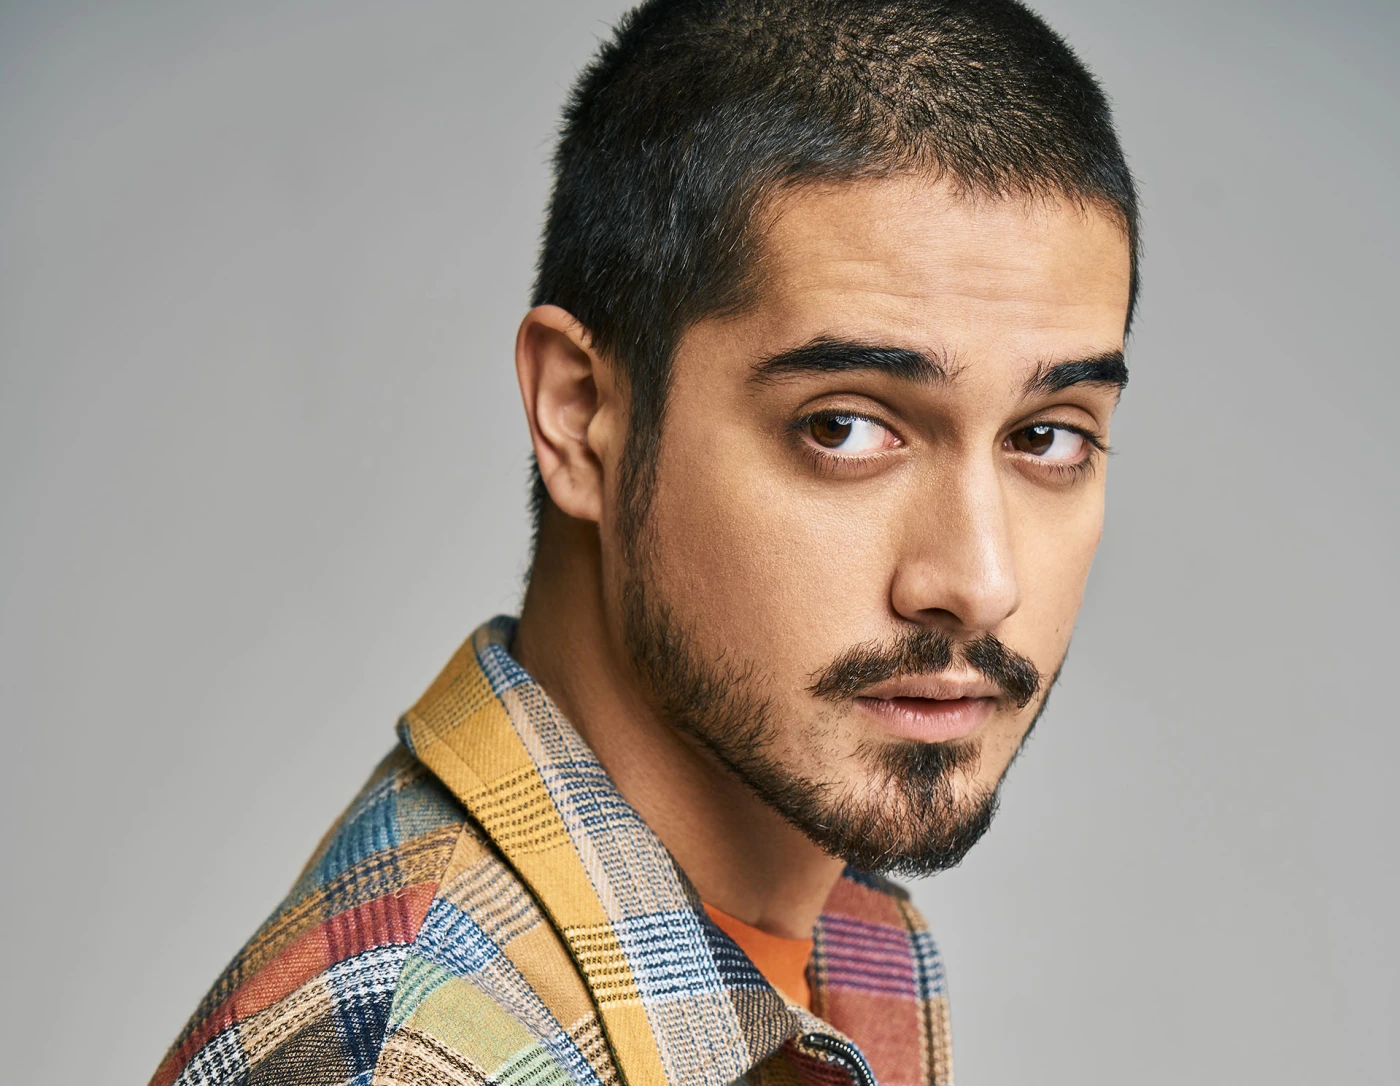 Victorious Cast - Avan Jogia as Beck Oliver